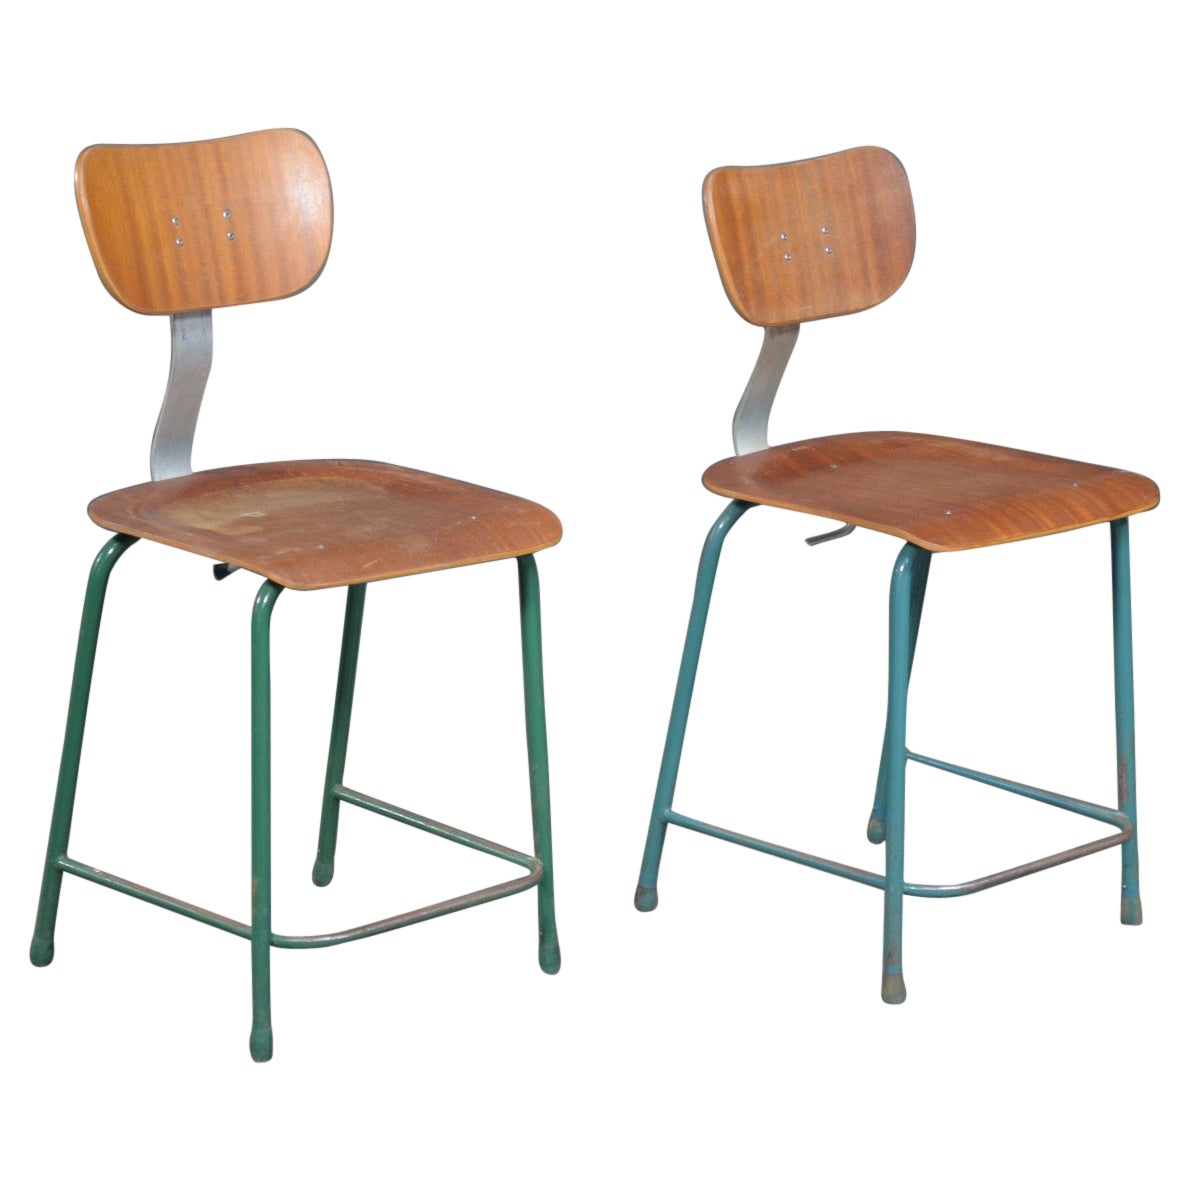 Midcentury Industrial / Work Stools Chairs For Sale